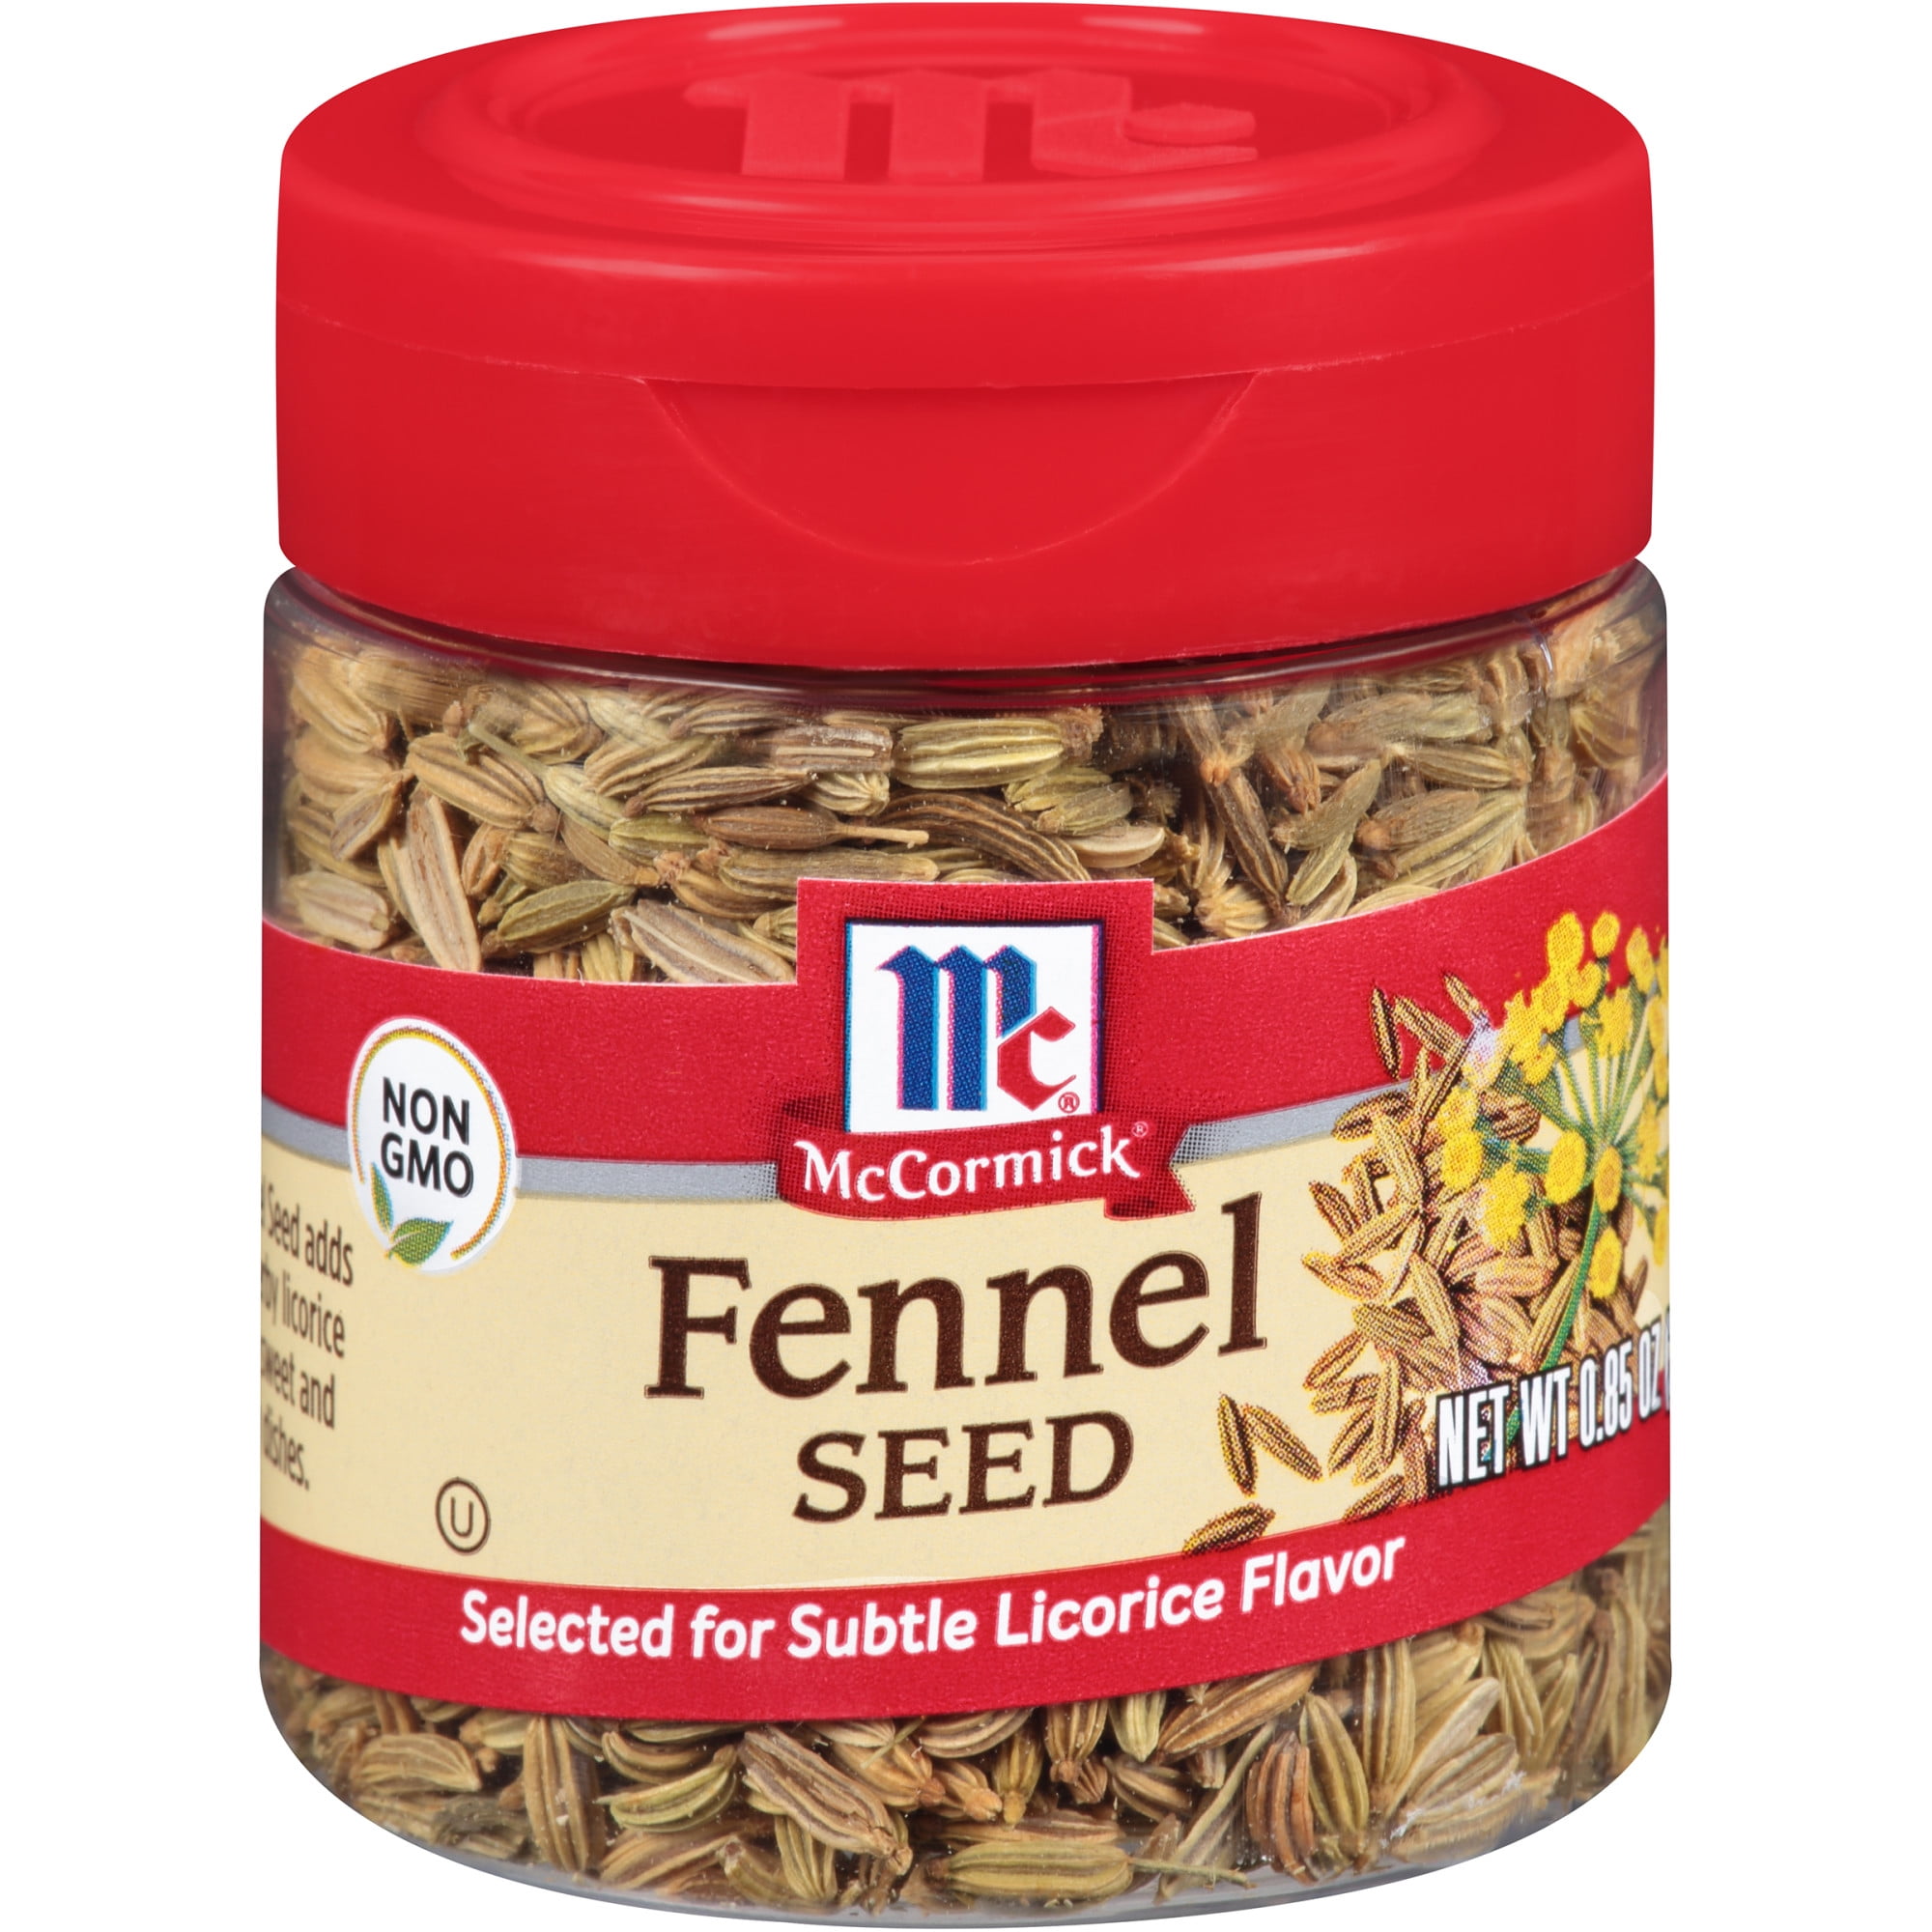 What's Fennel Seeds Things To Know Before You Get This